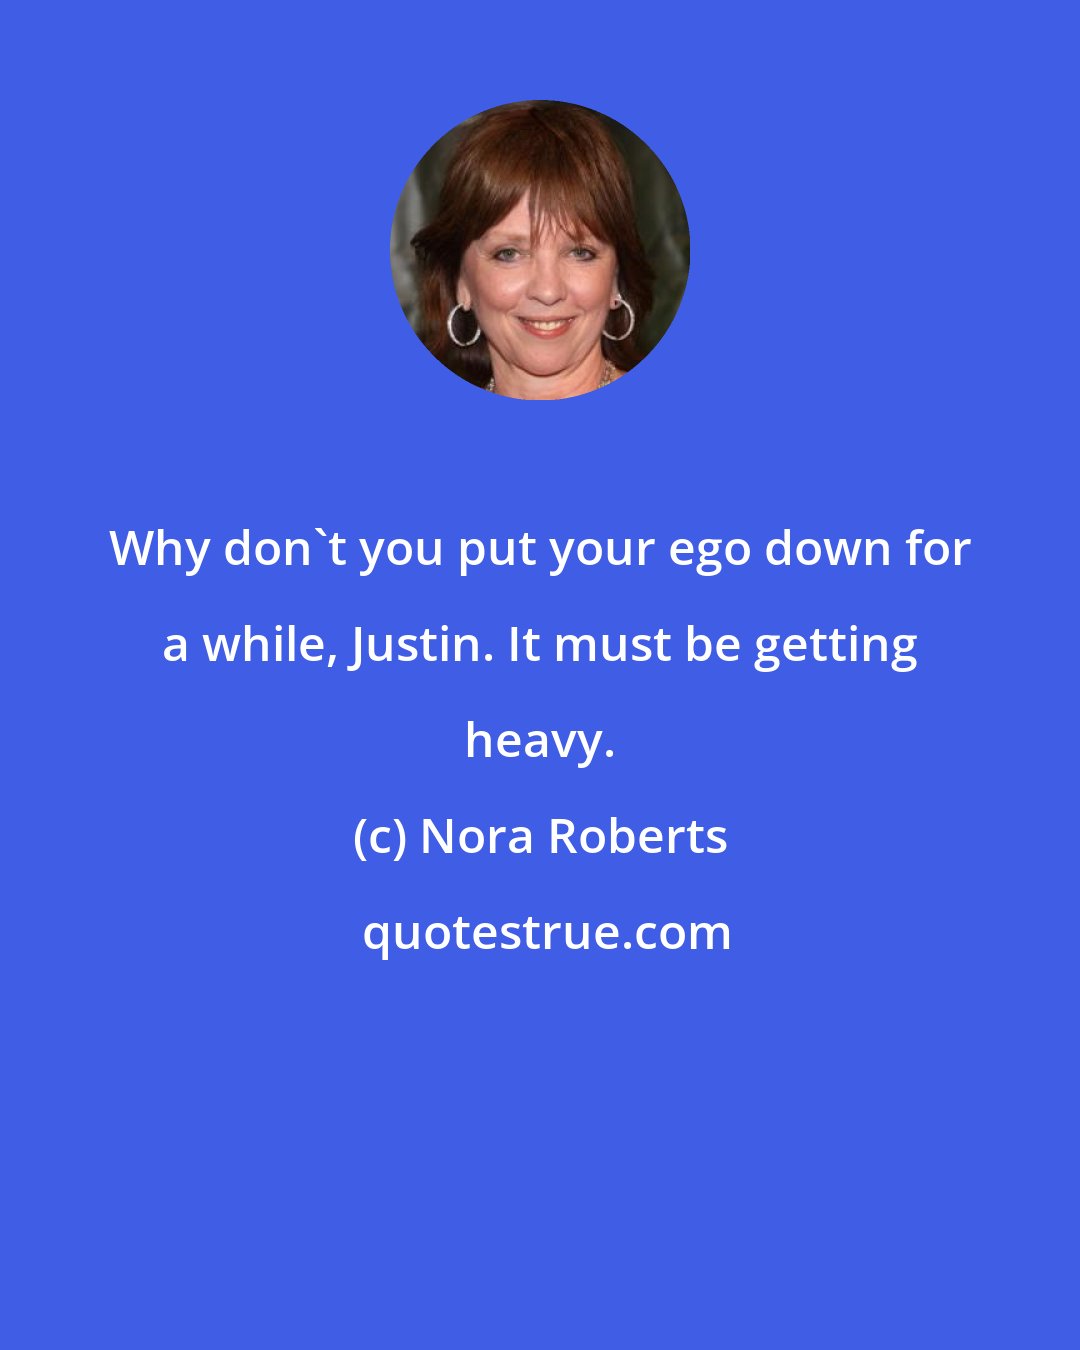 Nora Roberts: Why don't you put your ego down for a while, Justin. It must be getting heavy.